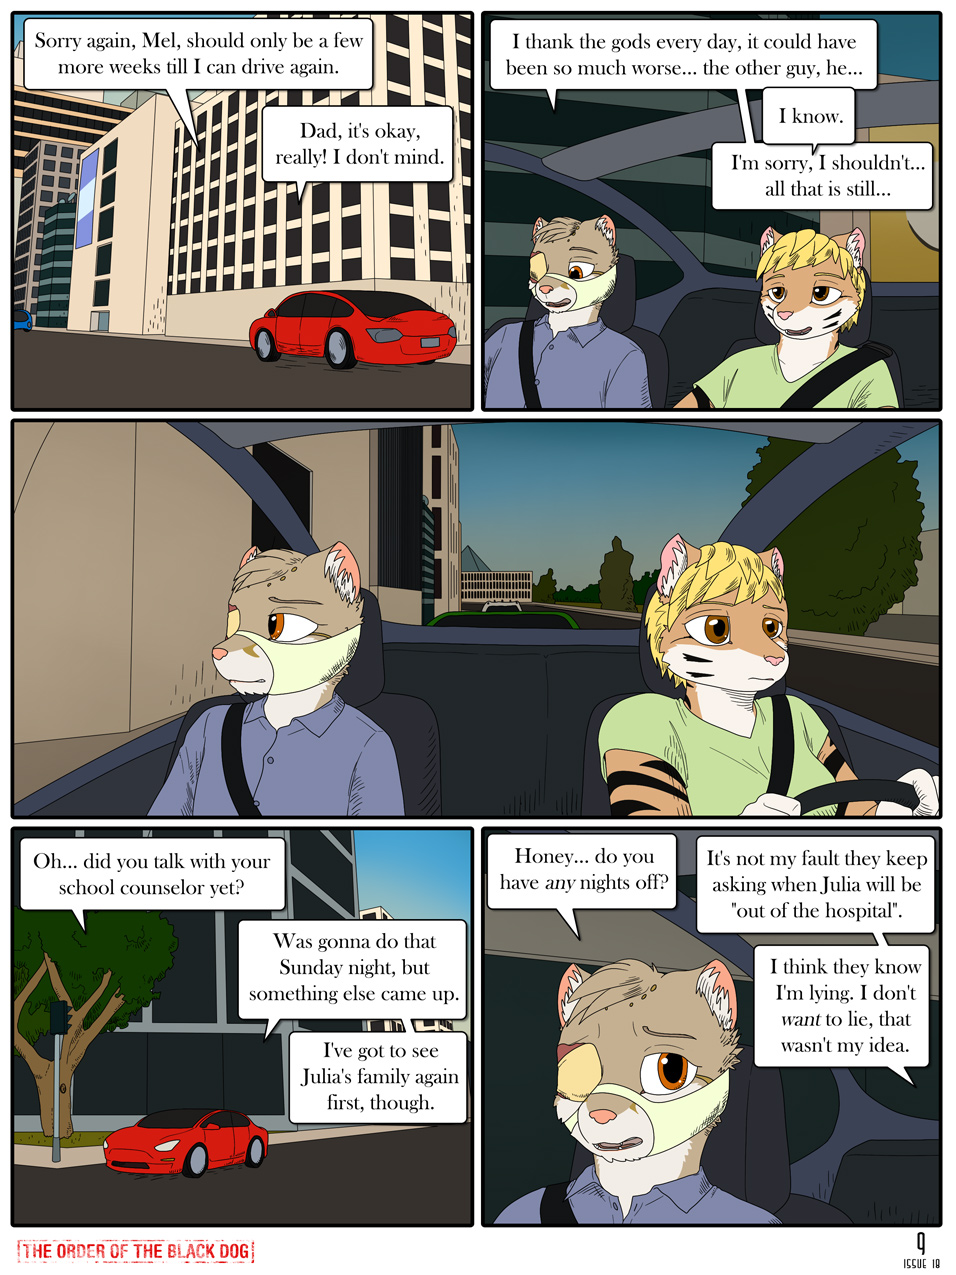 Issue 18, Page 9